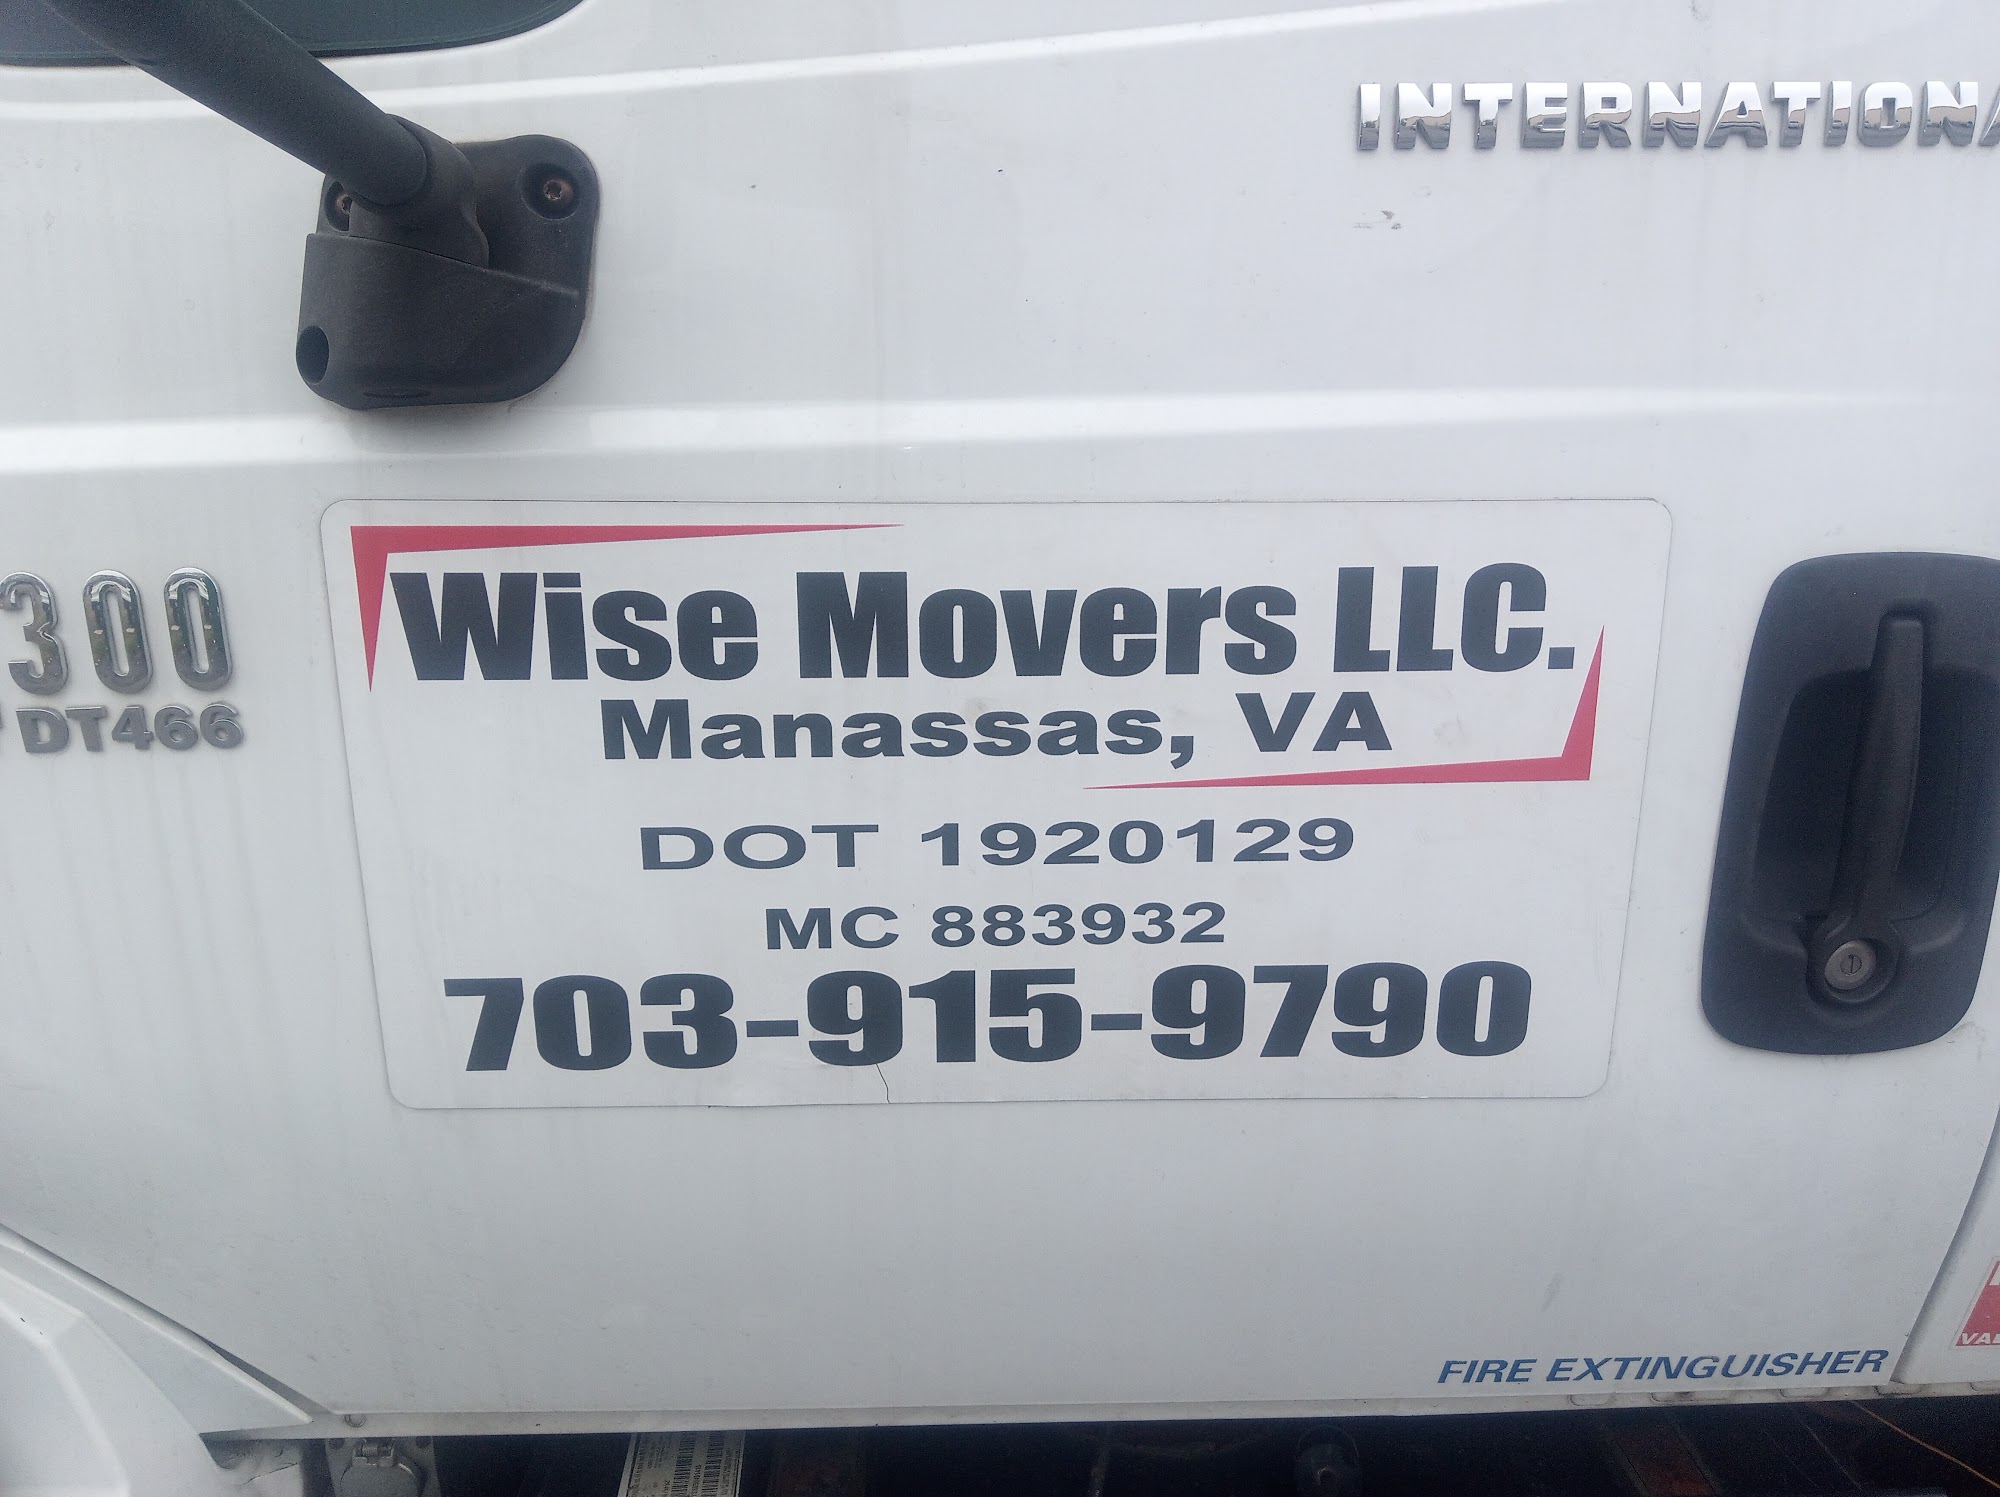 Wise Movers, LLC